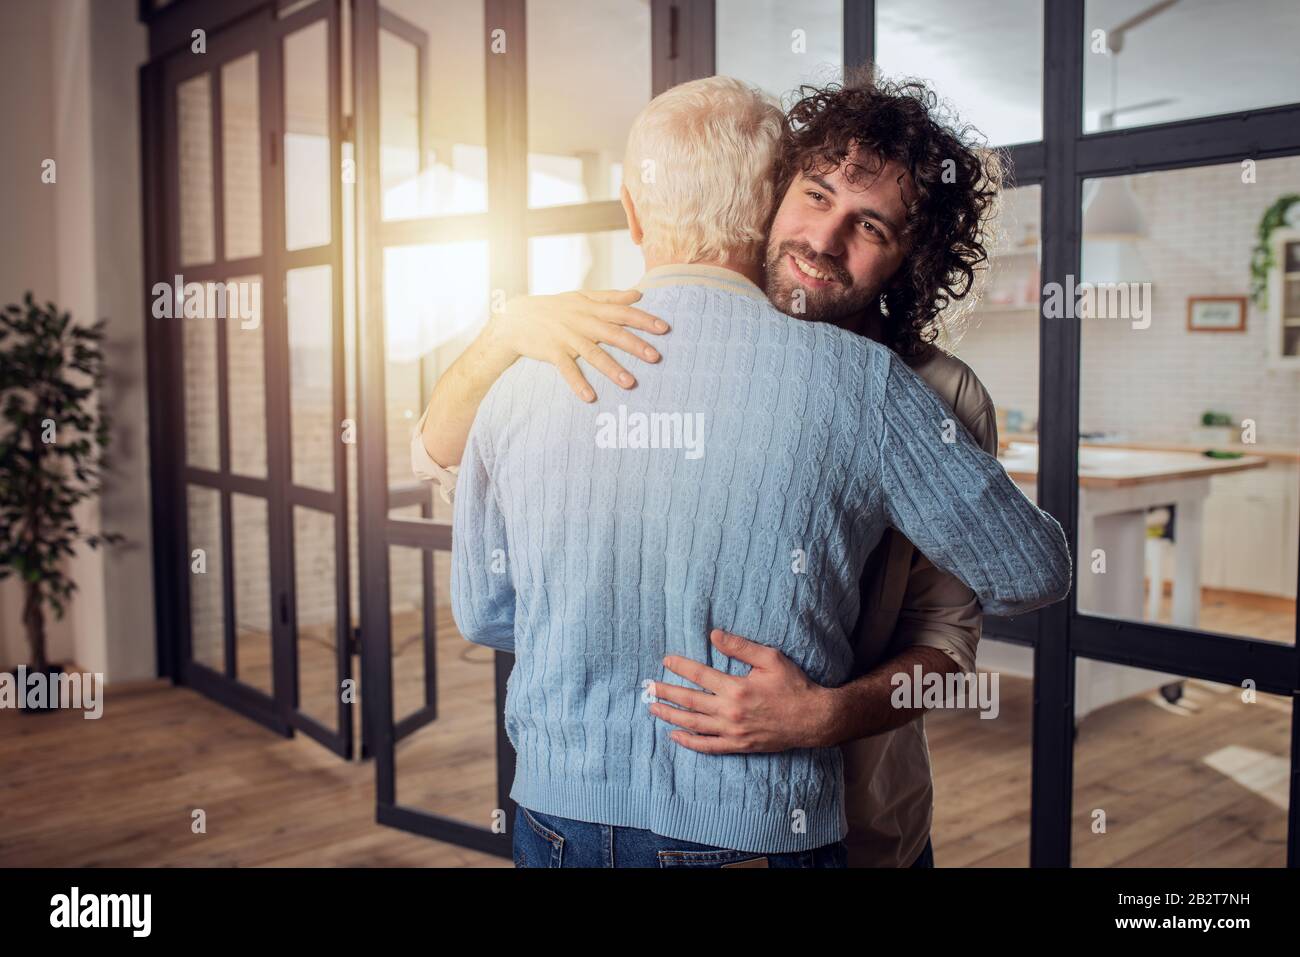 Dad and son hug each other at home. Concept of family relationship Stock Photo